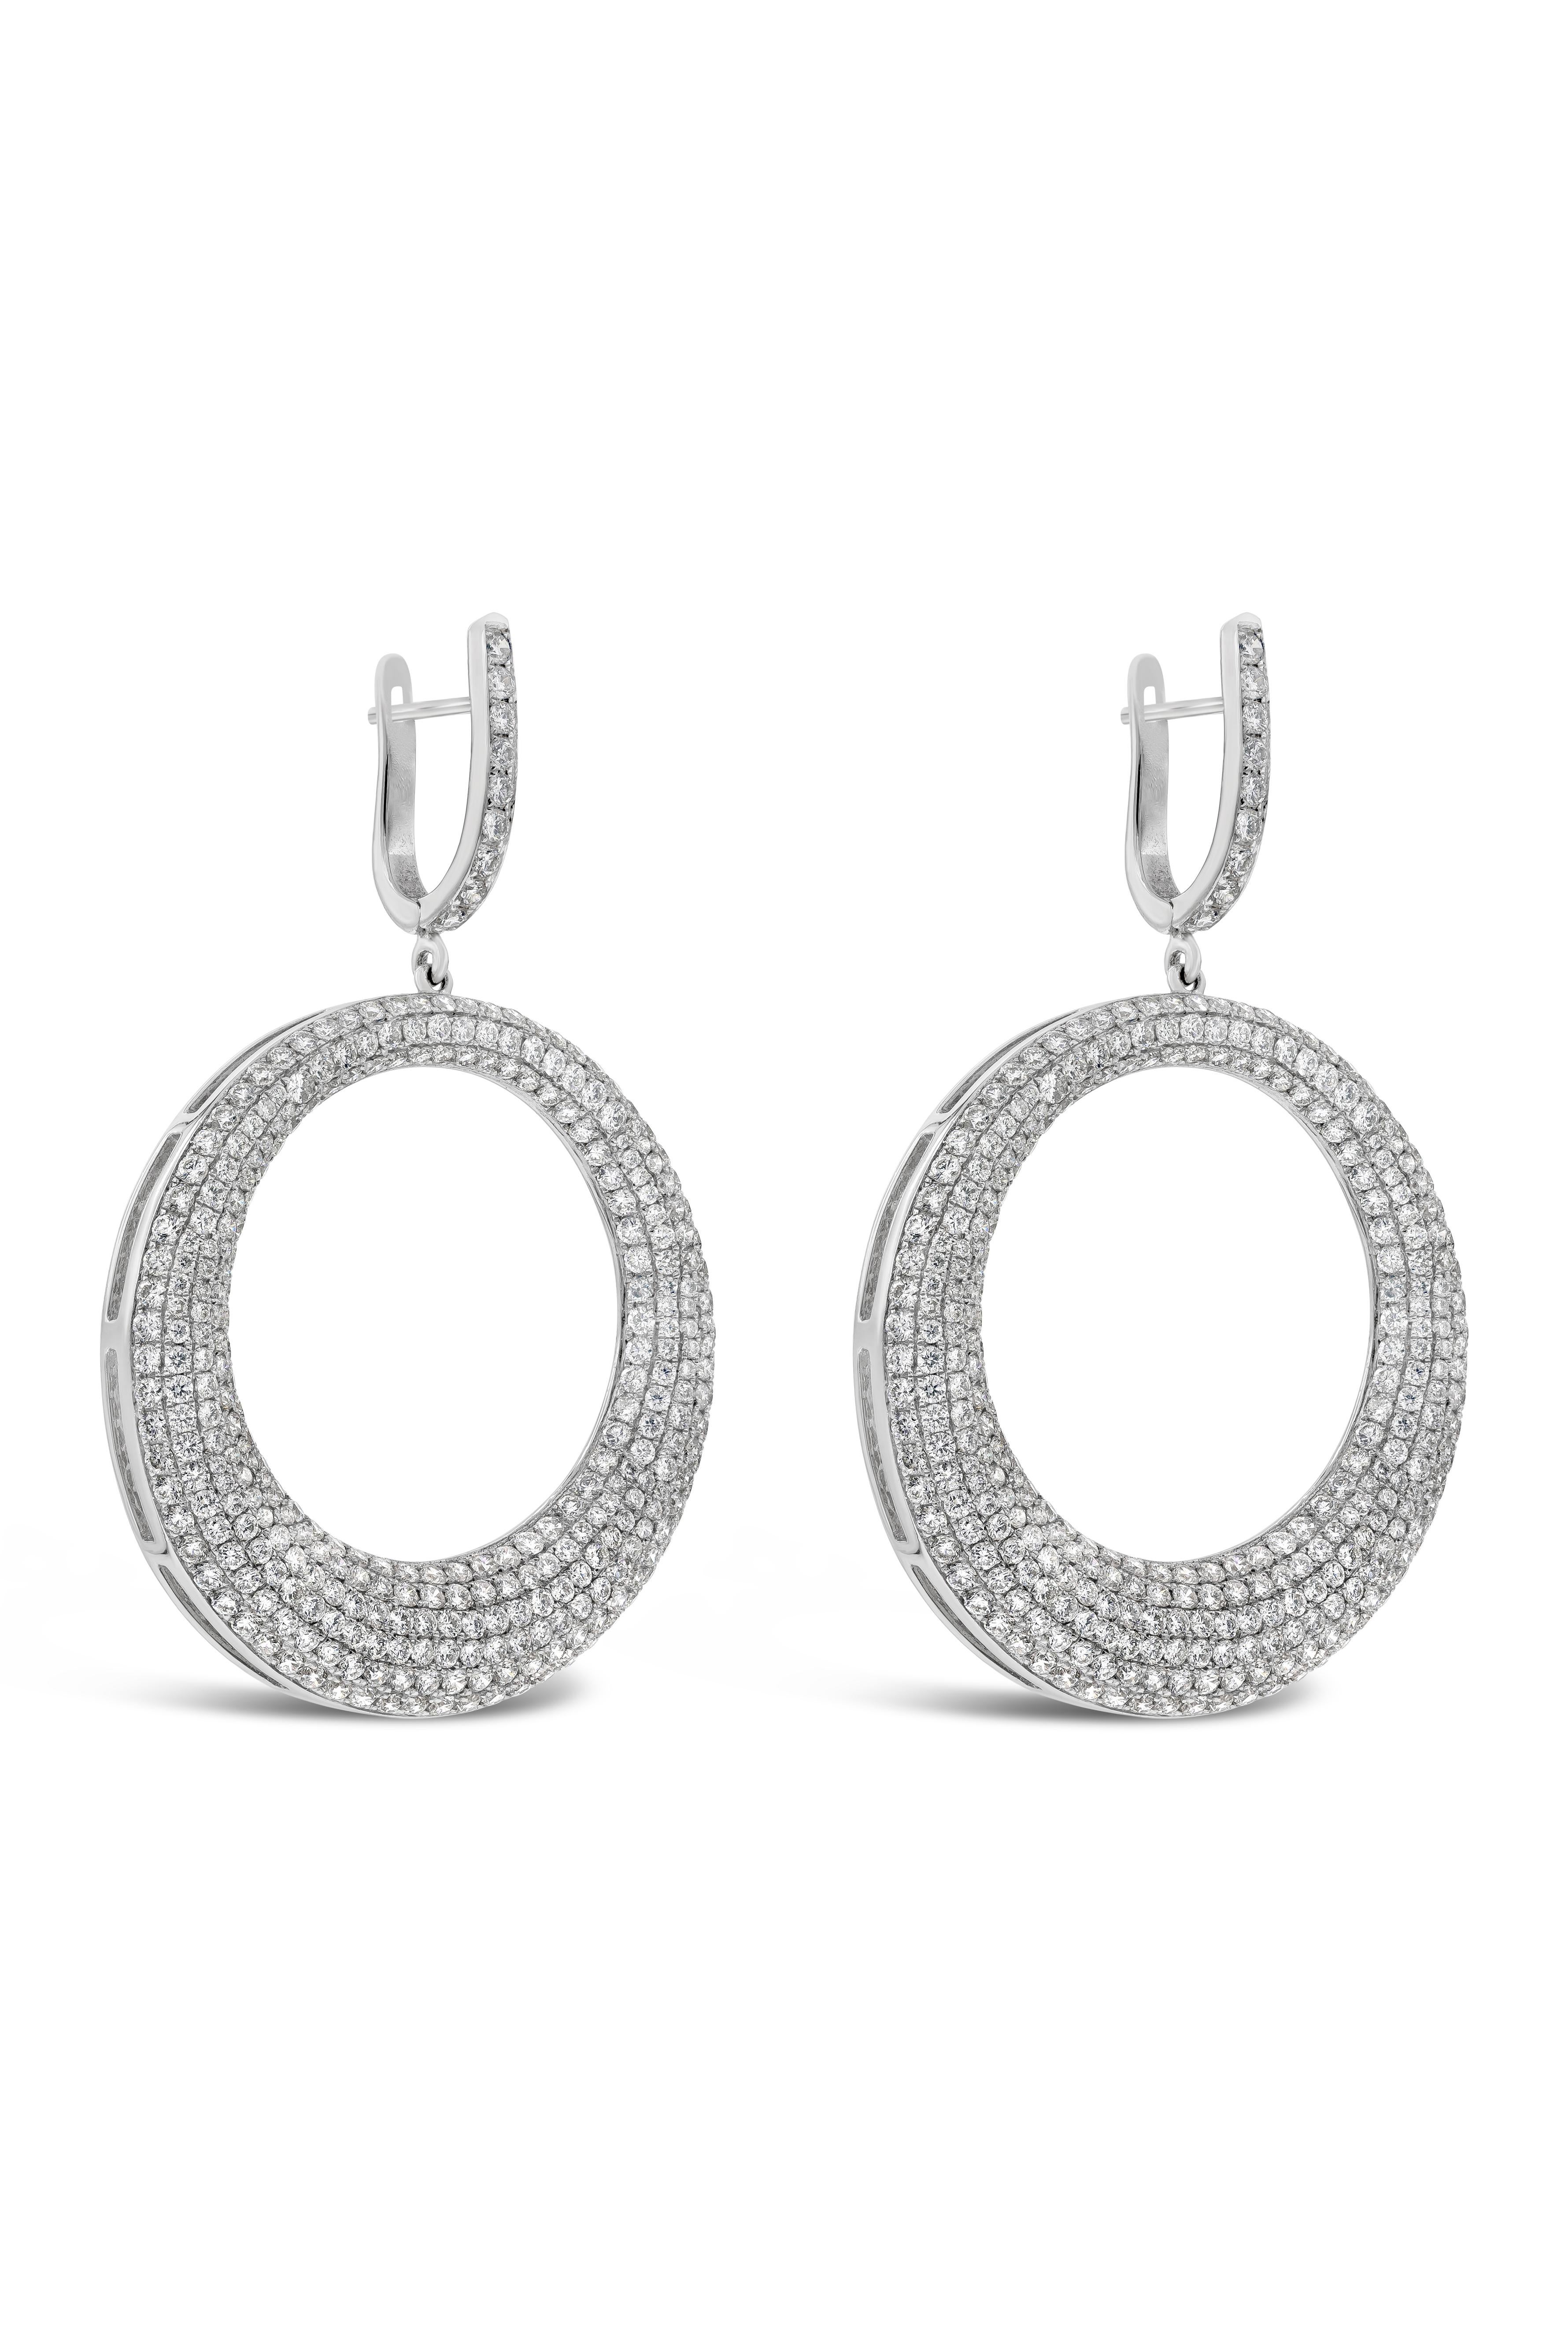 A fashionable pair of dangle earrings showcasing an open-work circular figure, micro pave set with round brilliant diamonds weighing 5.68 carats total. Suspended on a diamond encrusted bale. Made in 18K White Gold. 

Roman Malakov is a custom house,